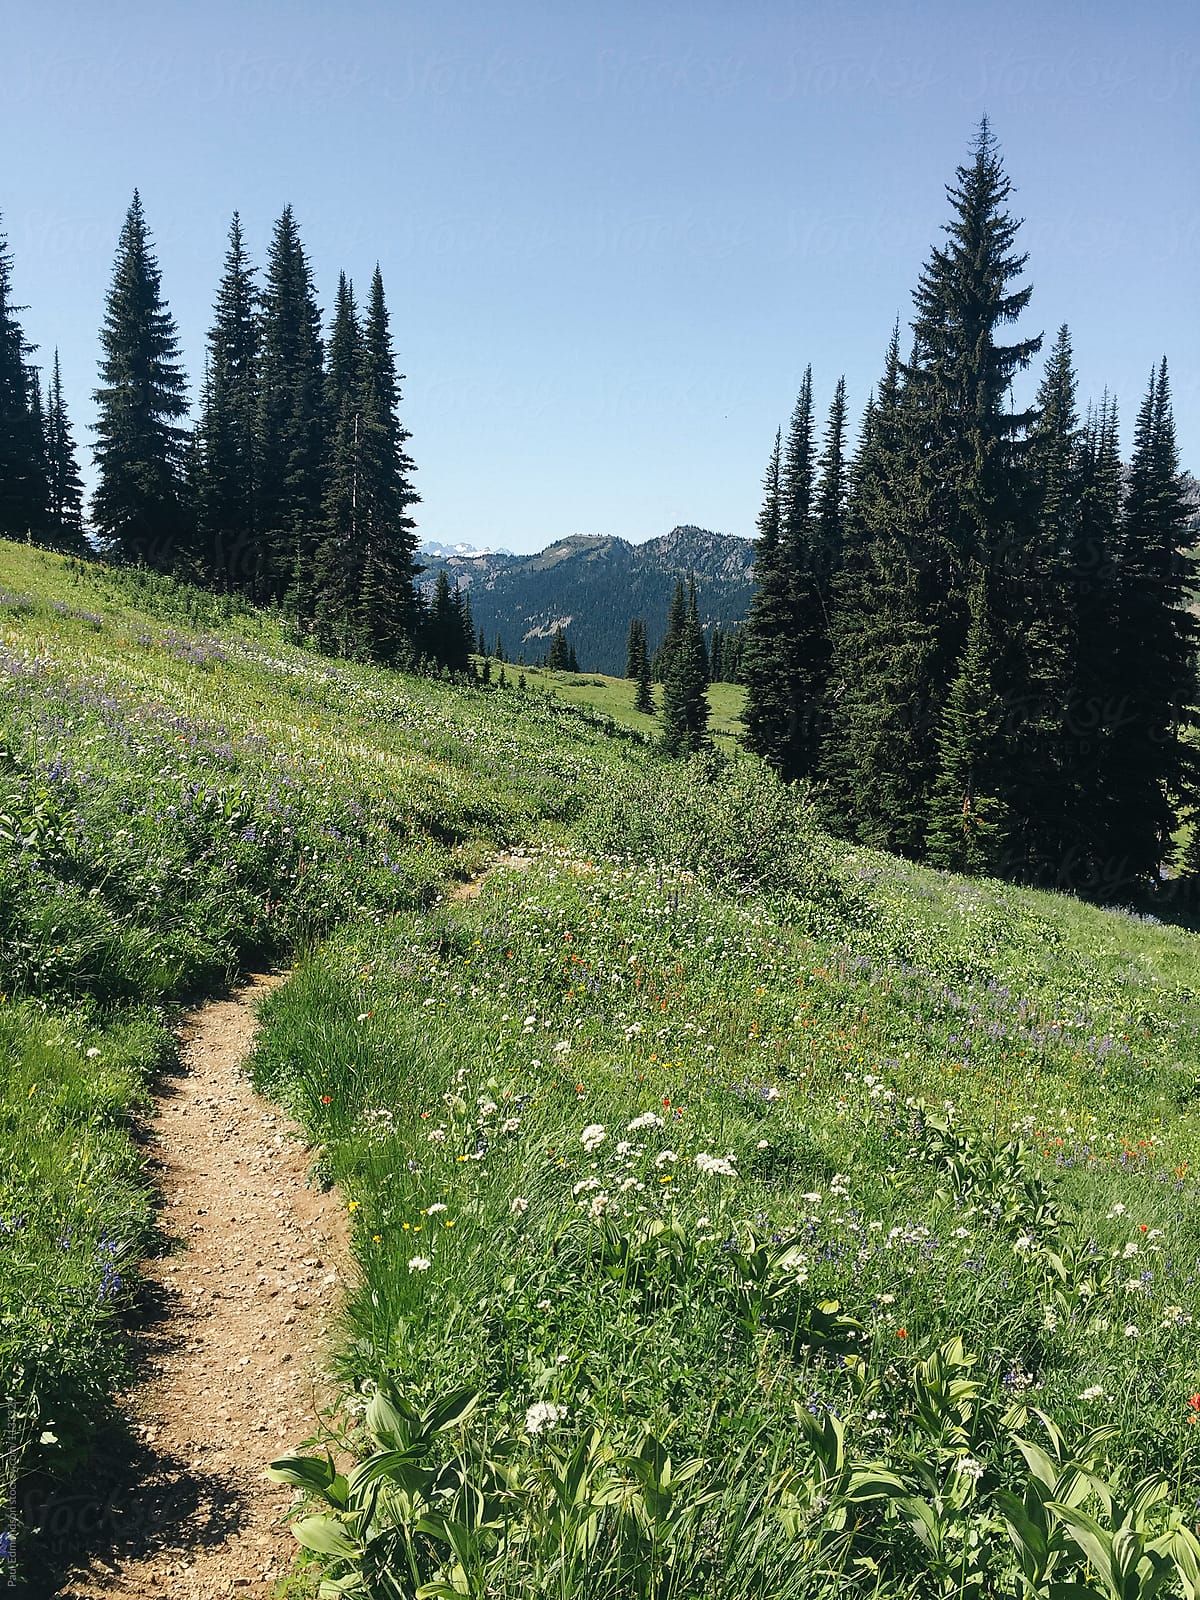 Hiking trail through wildflower meadow and mountains, North Cascades, WA